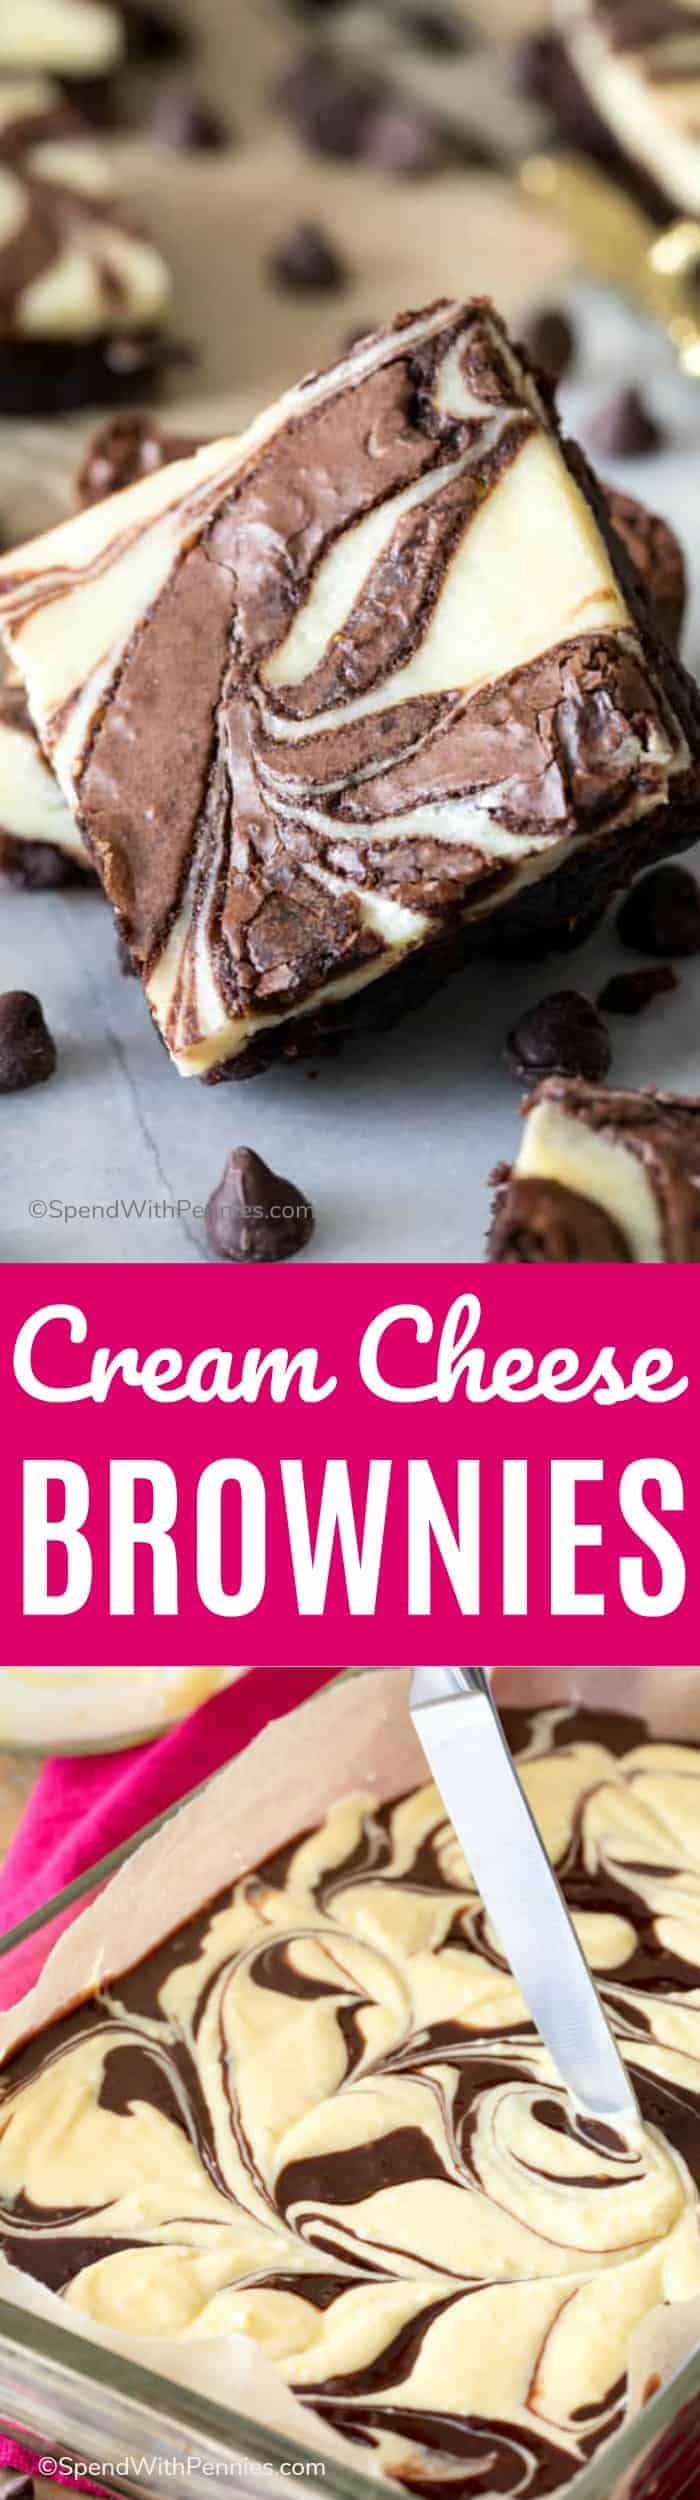 Cream Cheese Brownies with text